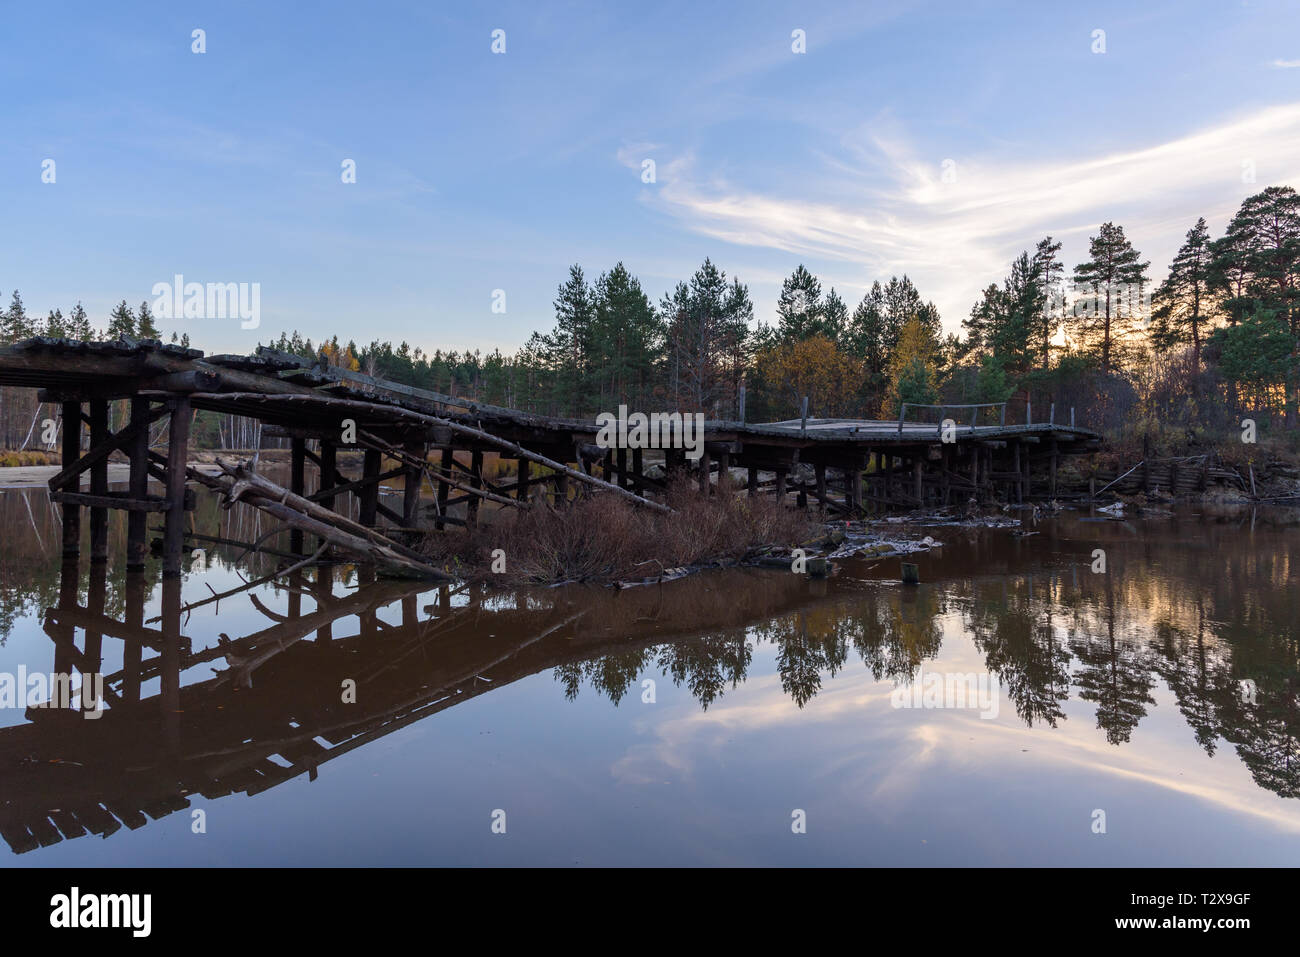 Old wooden bridge over the river in the forest Stock Photo